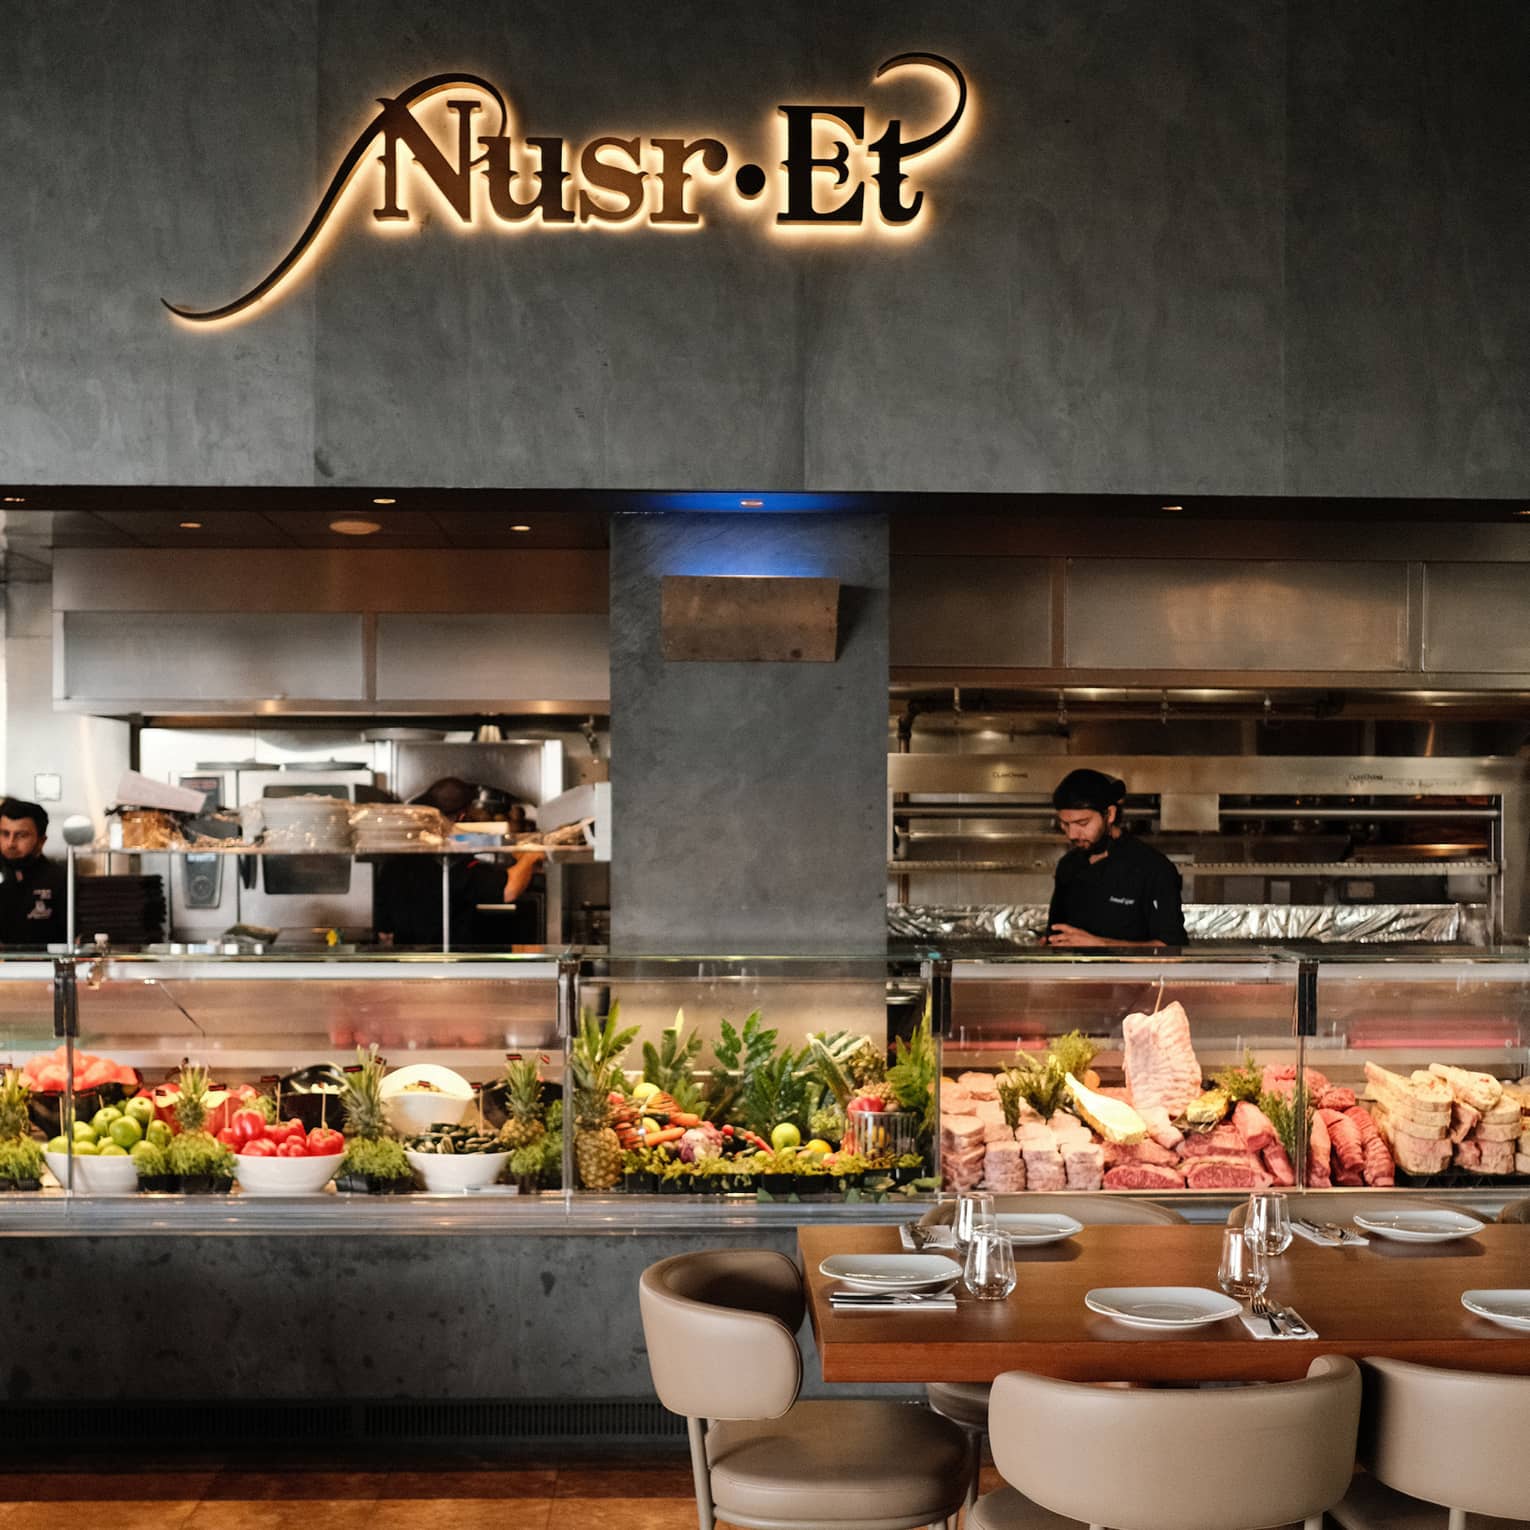 Open kitchen counter at Nusr-Et restaurant, with a display of meat